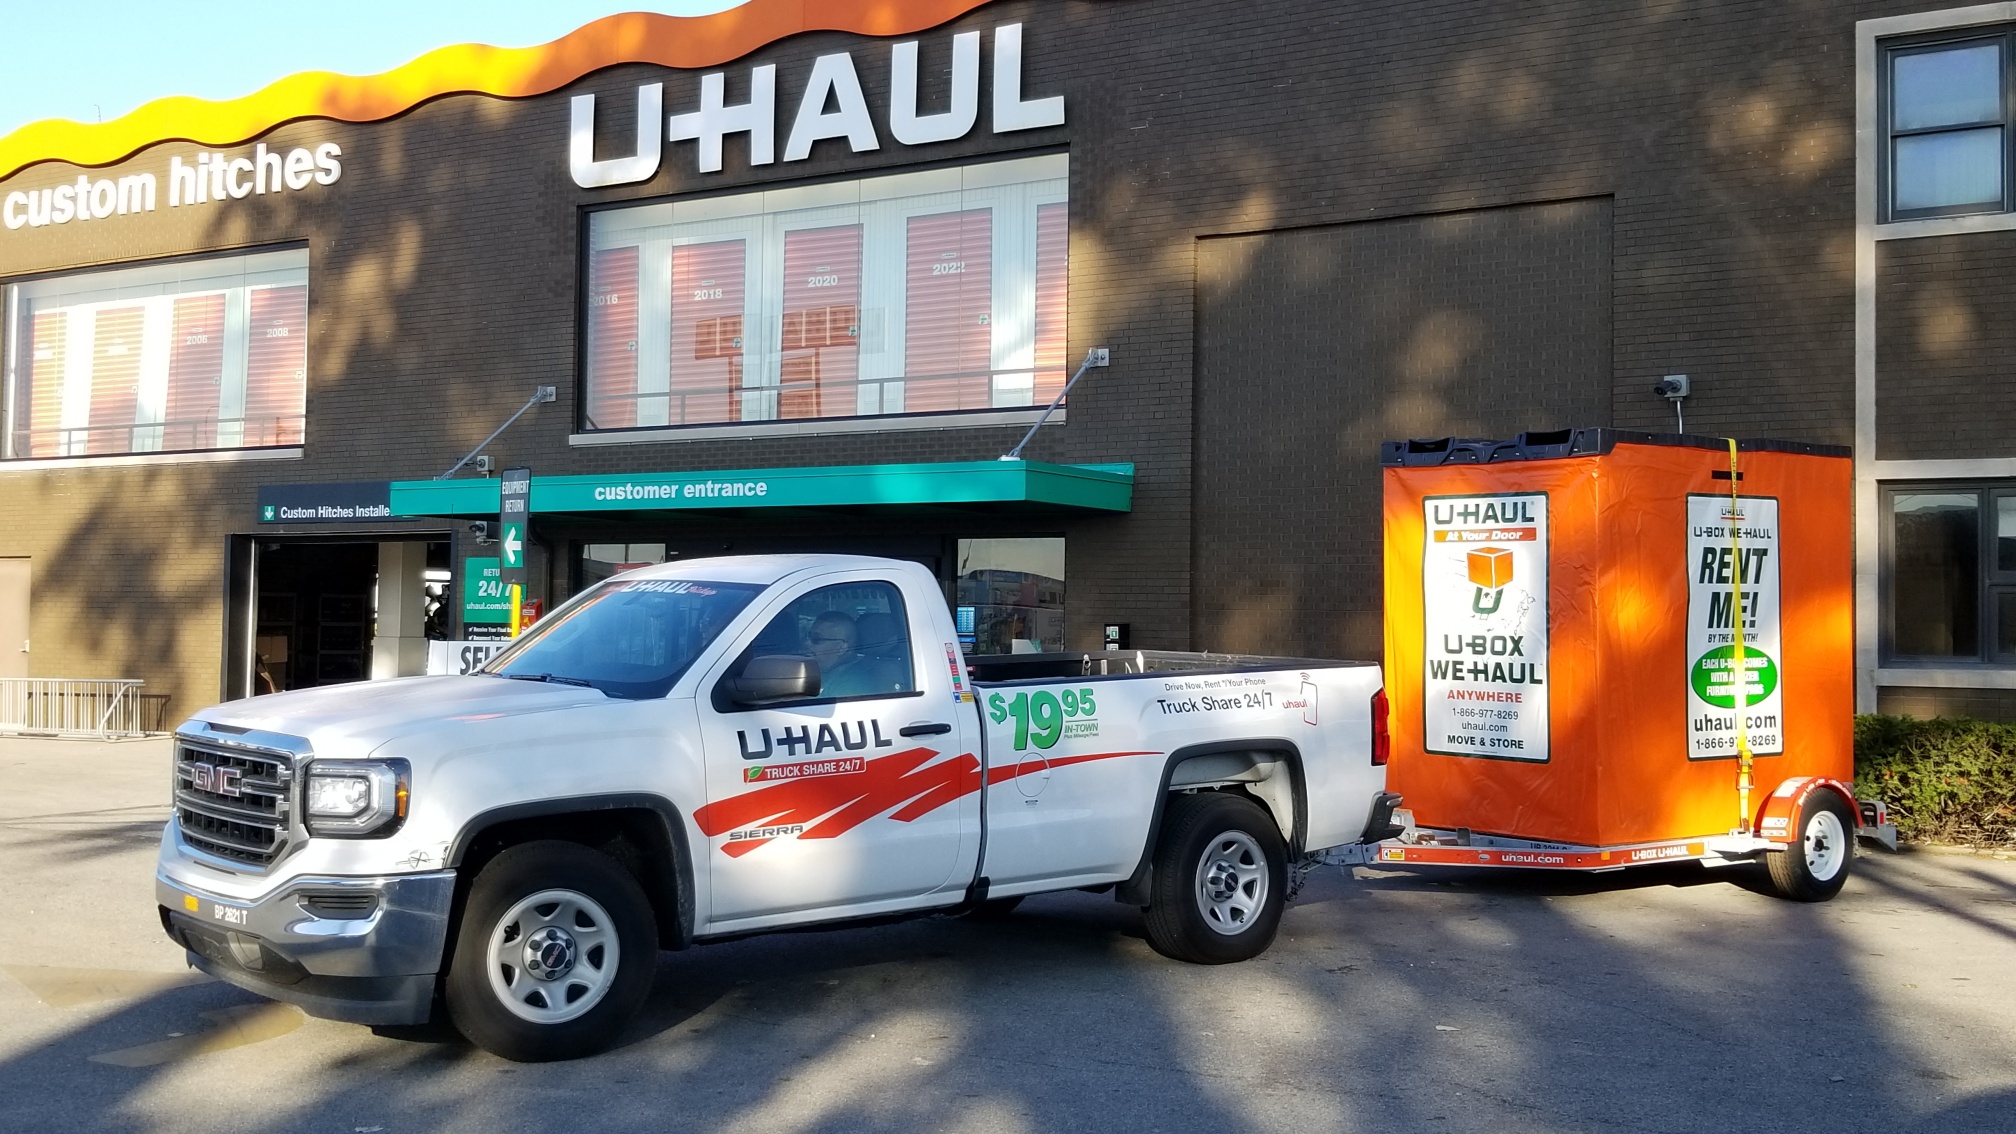 Woolsey and Hill Fires: U-Haul Offers 30 Days Free Self-Storage in SoCal